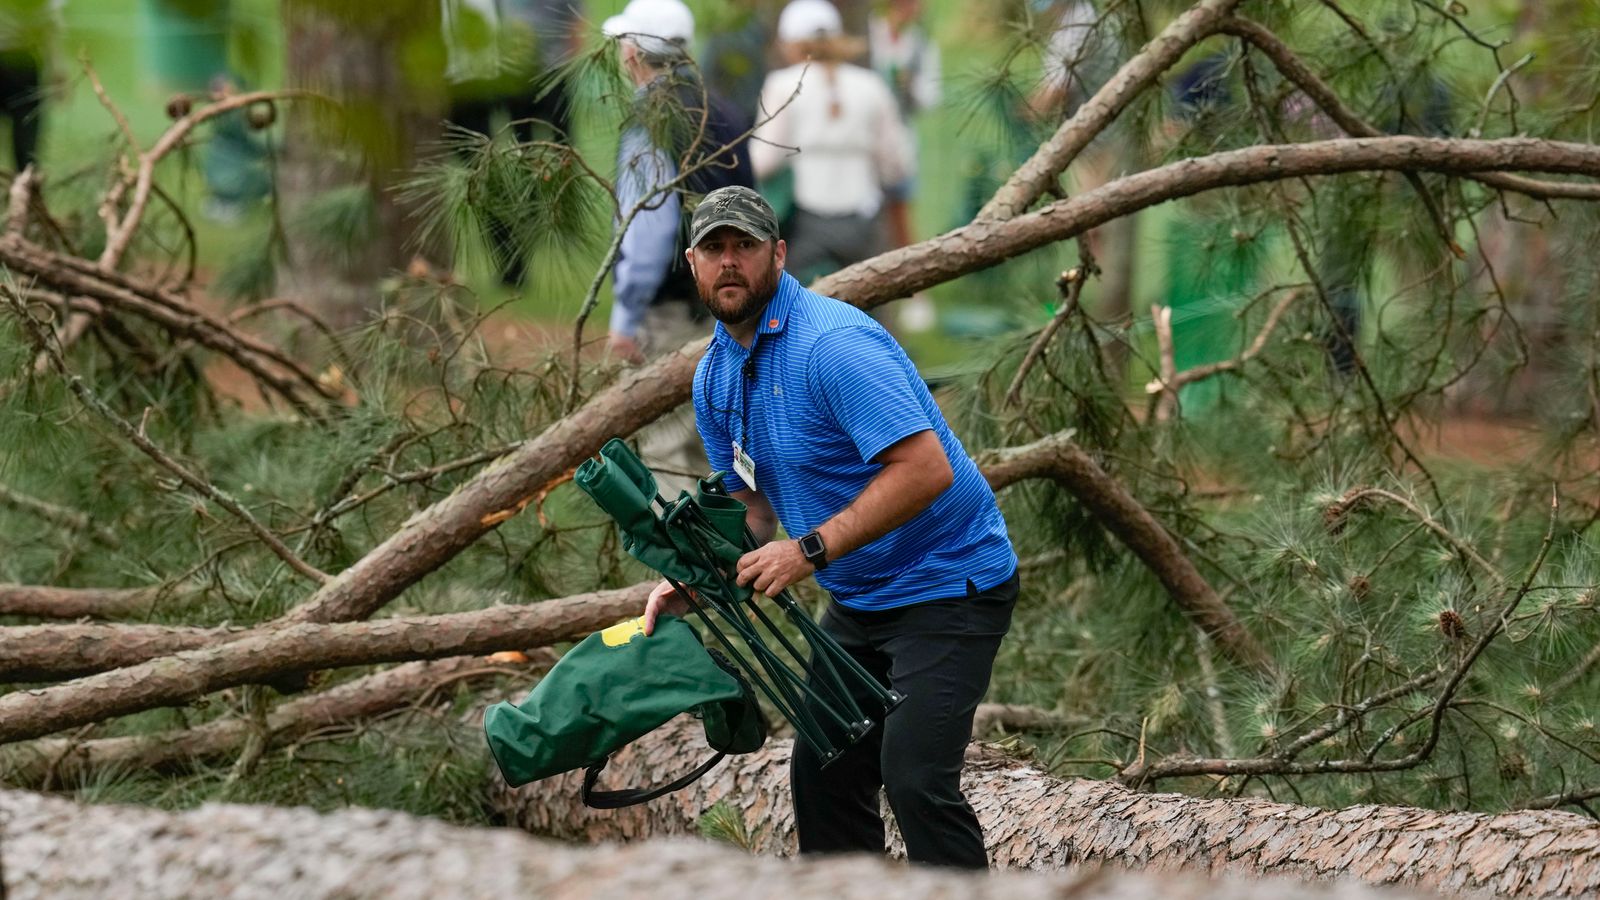 The Masters: Will more wet and stormy weather lead to rare Monday finish at Augusta National?